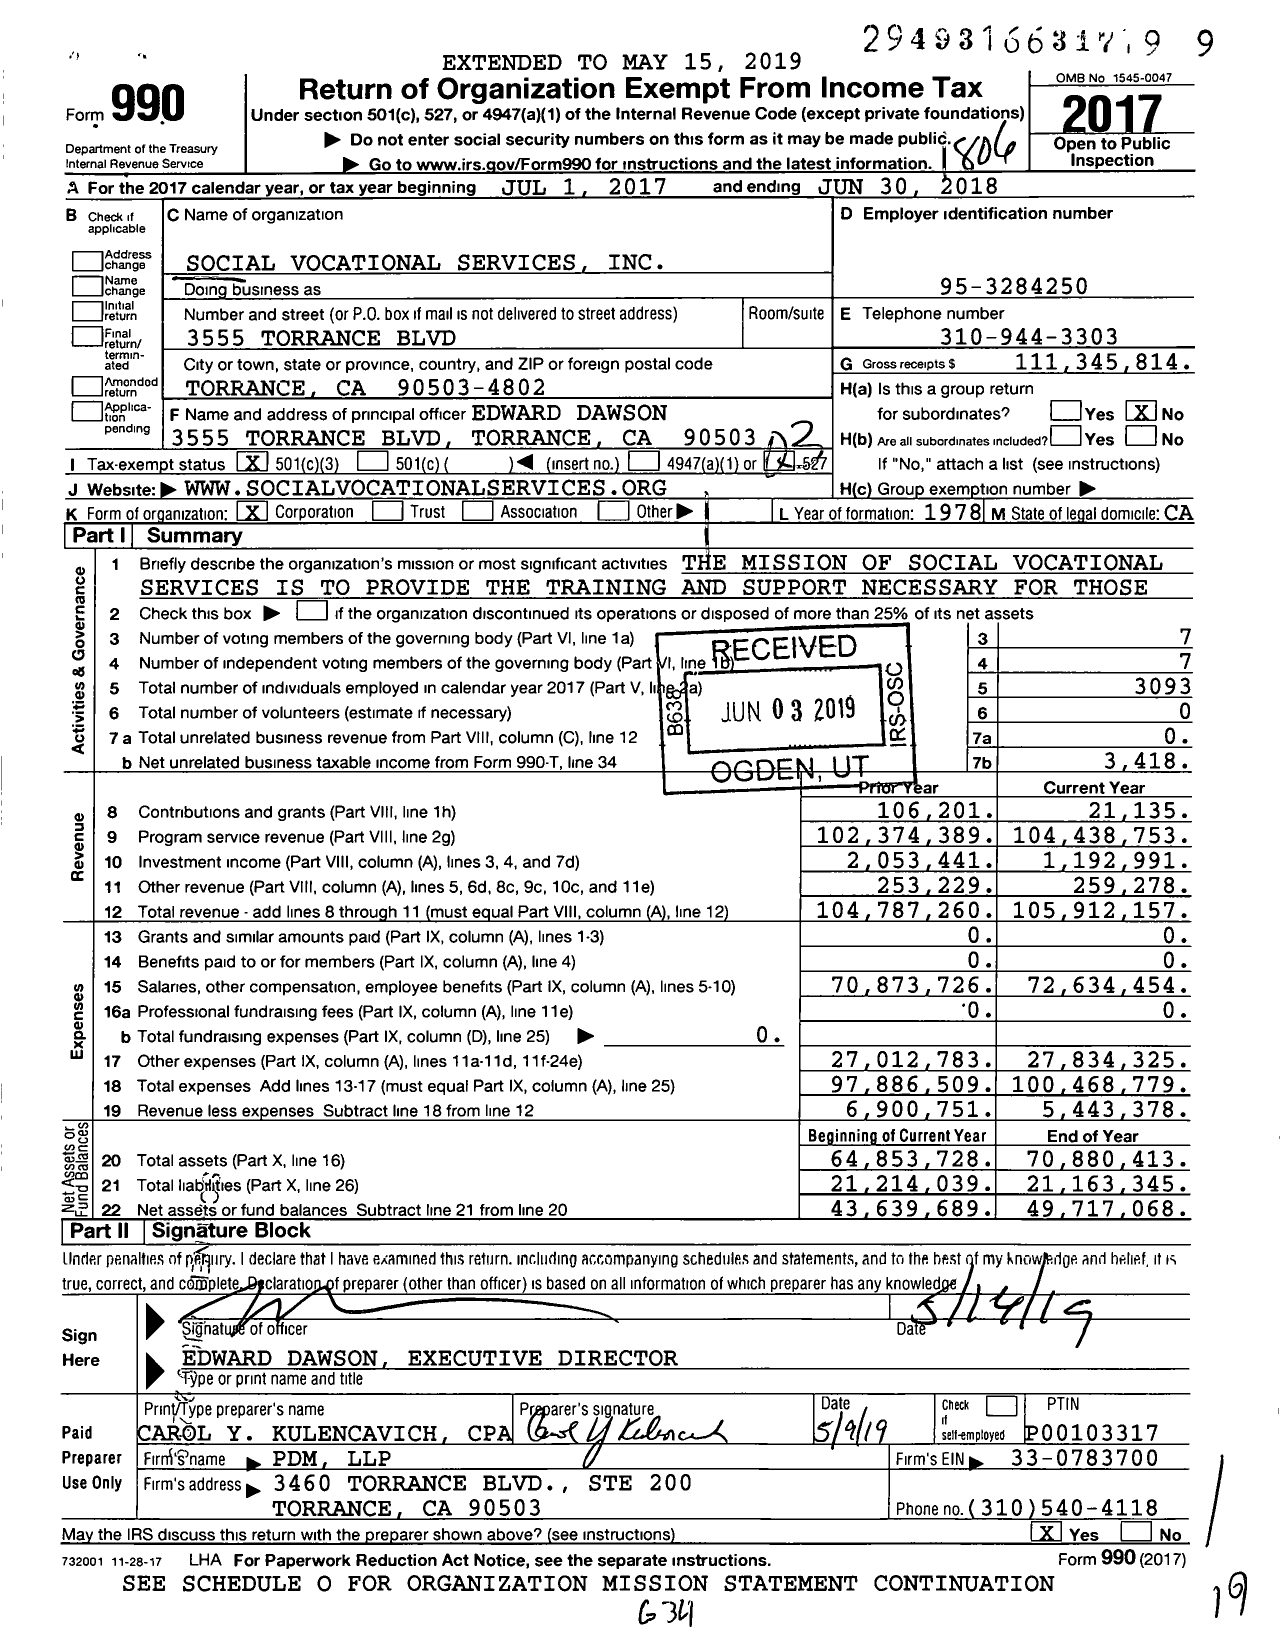 Image of first page of 2017 Form 990 for Social Vocational Services (SVS)